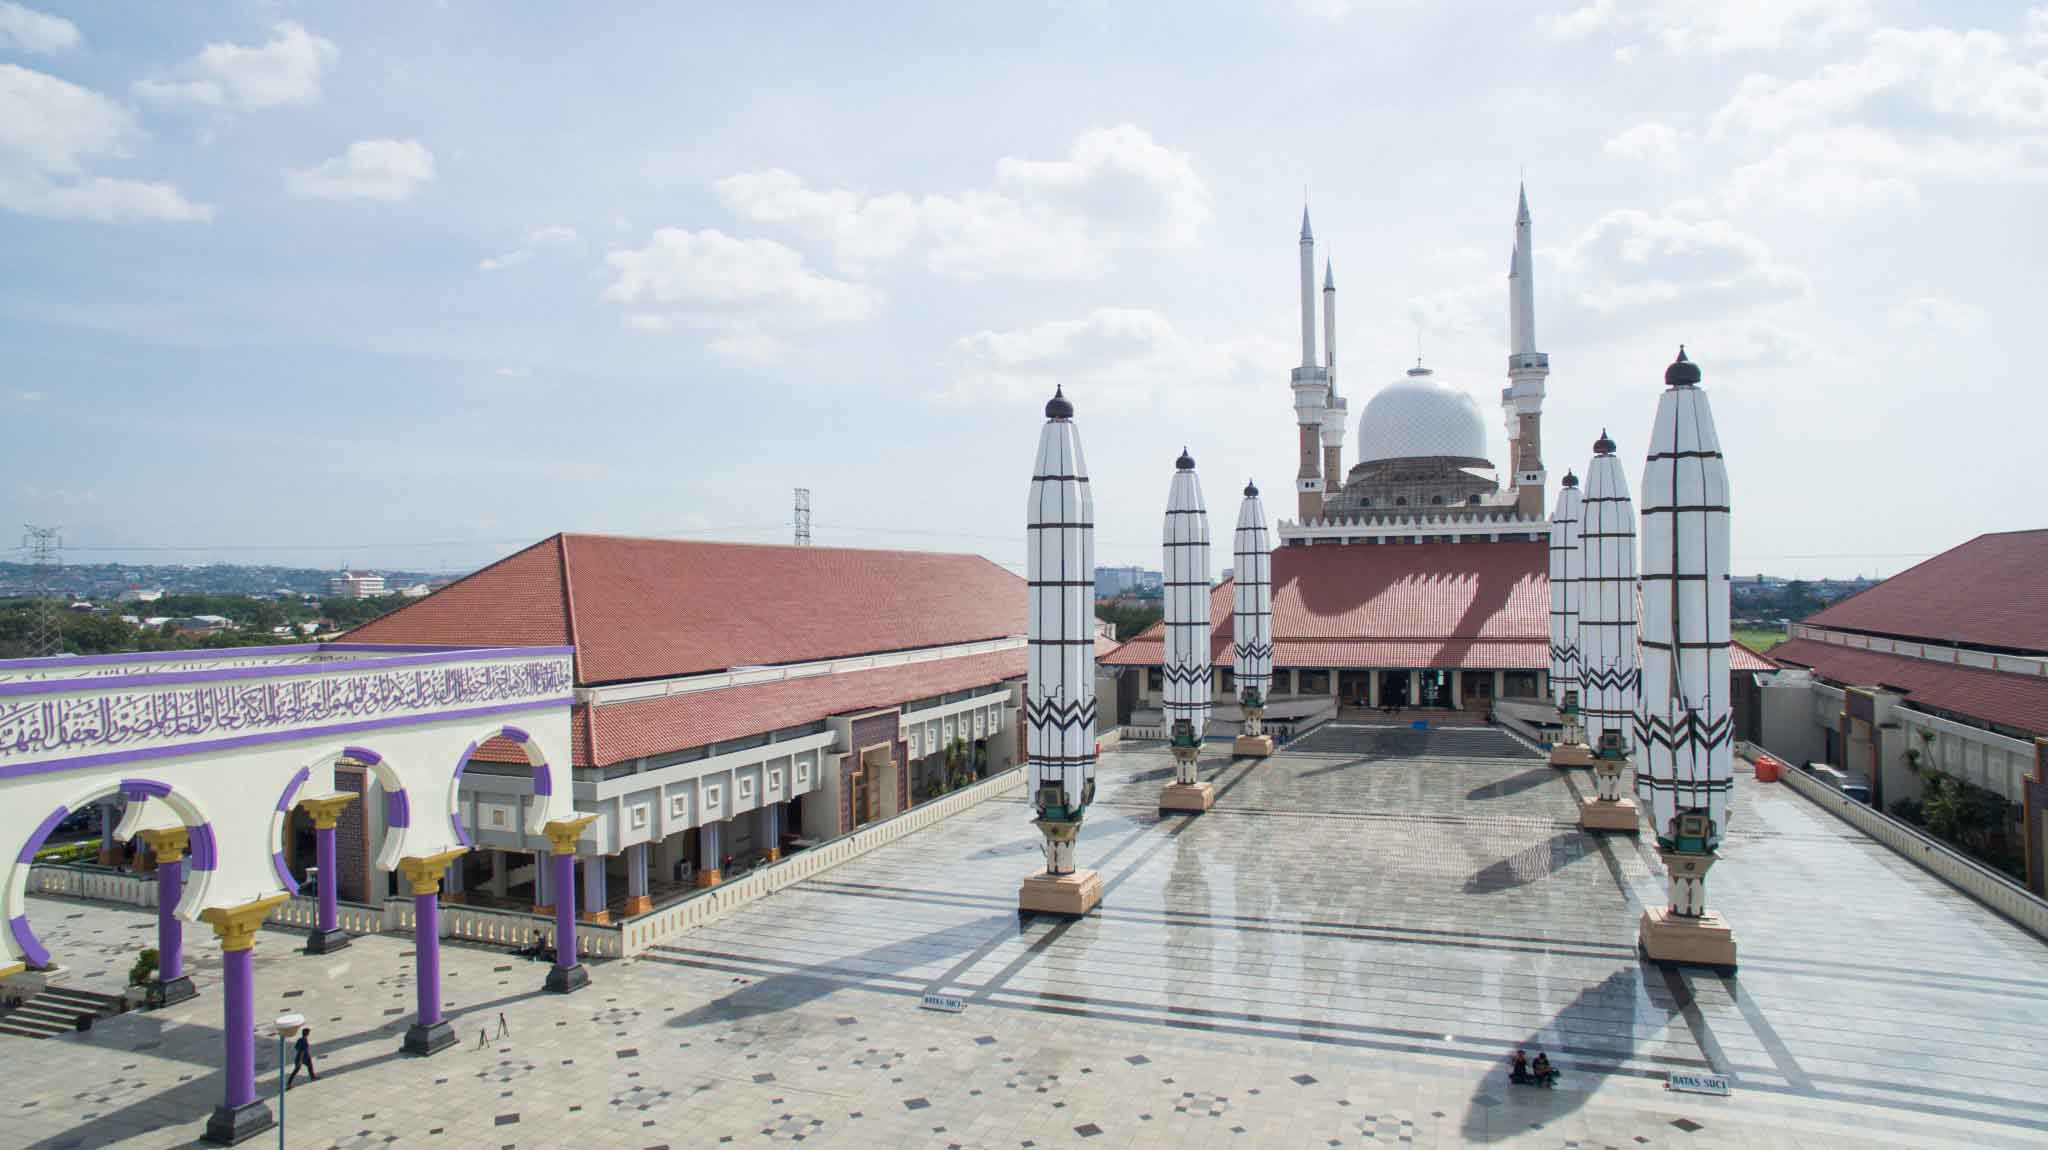 The view of Semarang great Mosque